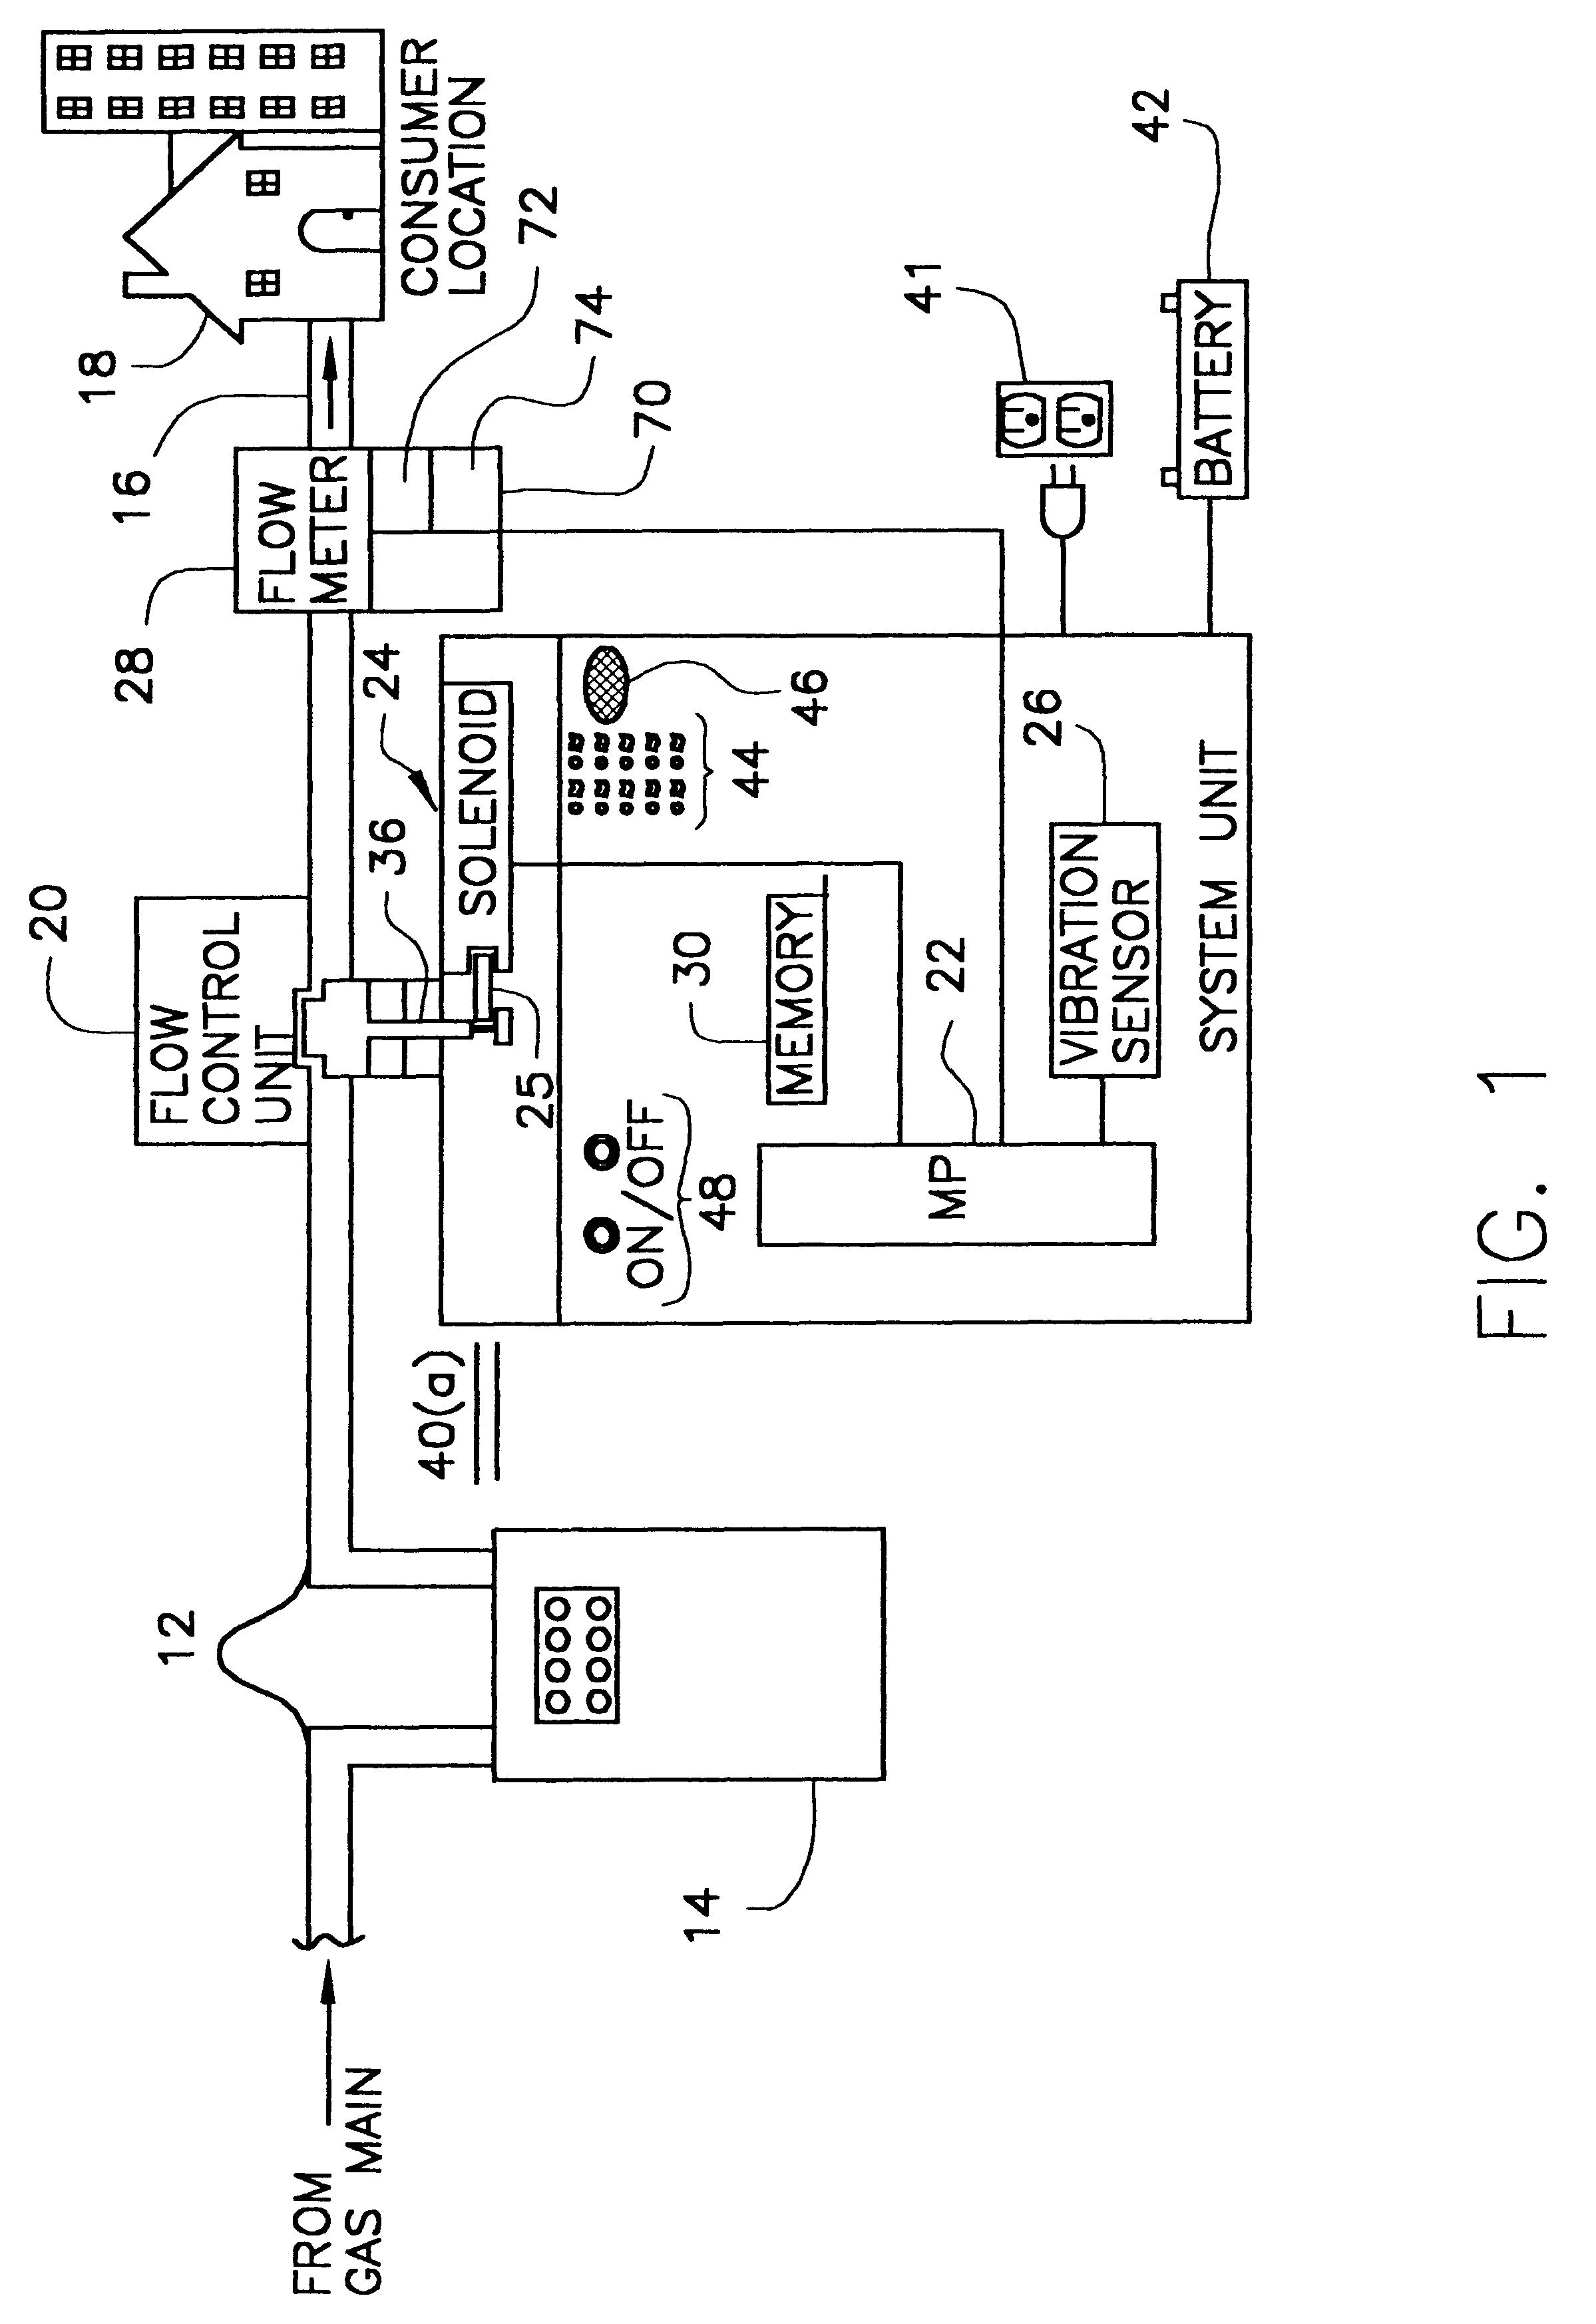 Enhanced and remote meter reading with vibration actuated valve